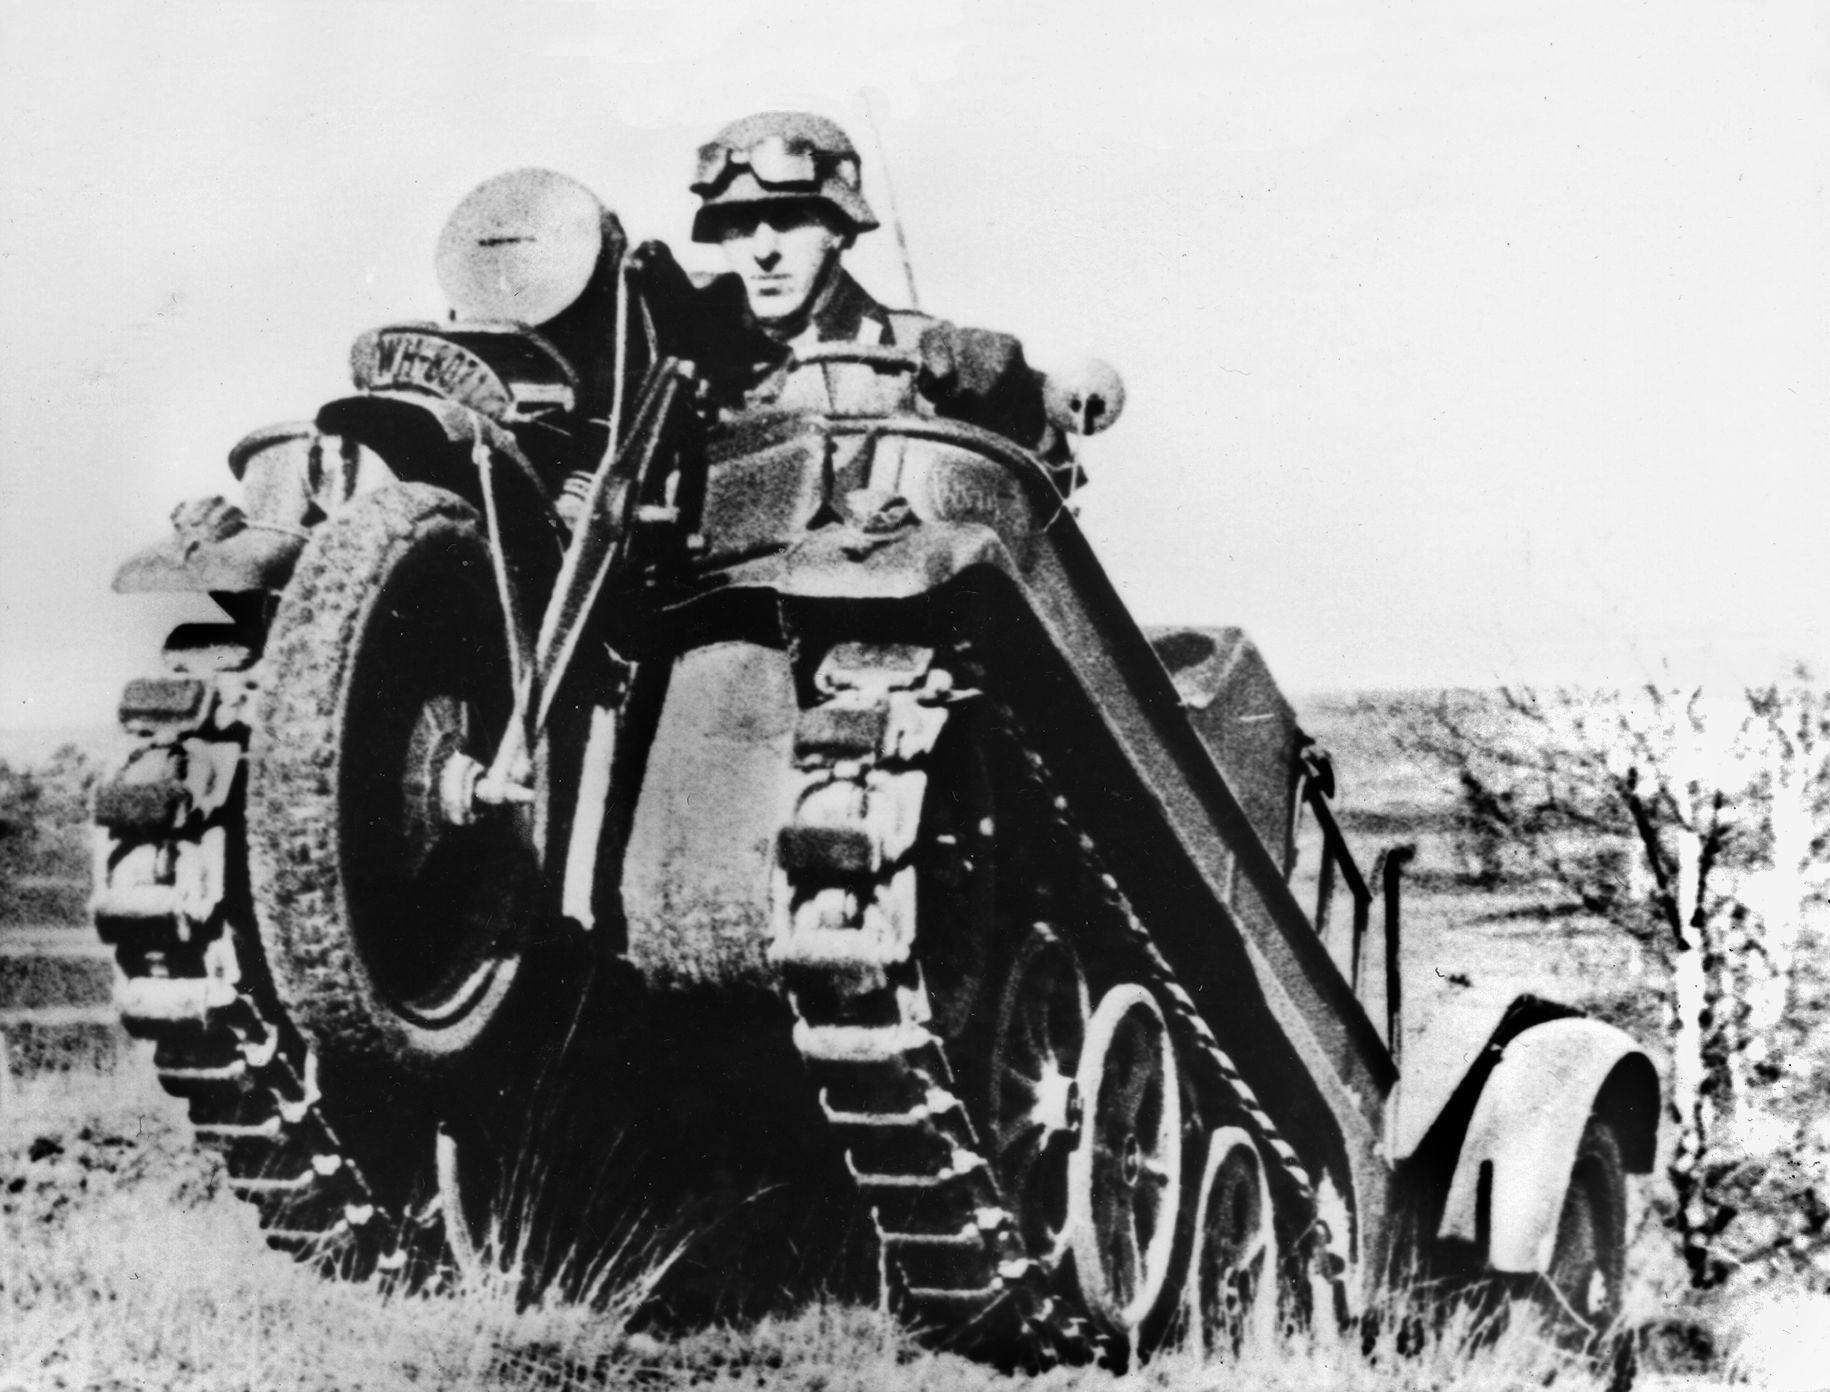 While capable of reaching 50 miles per hour on level roads, the Kettenkrad’s motorcycle-like front wheel was removed for off-road applications over rough terrain.